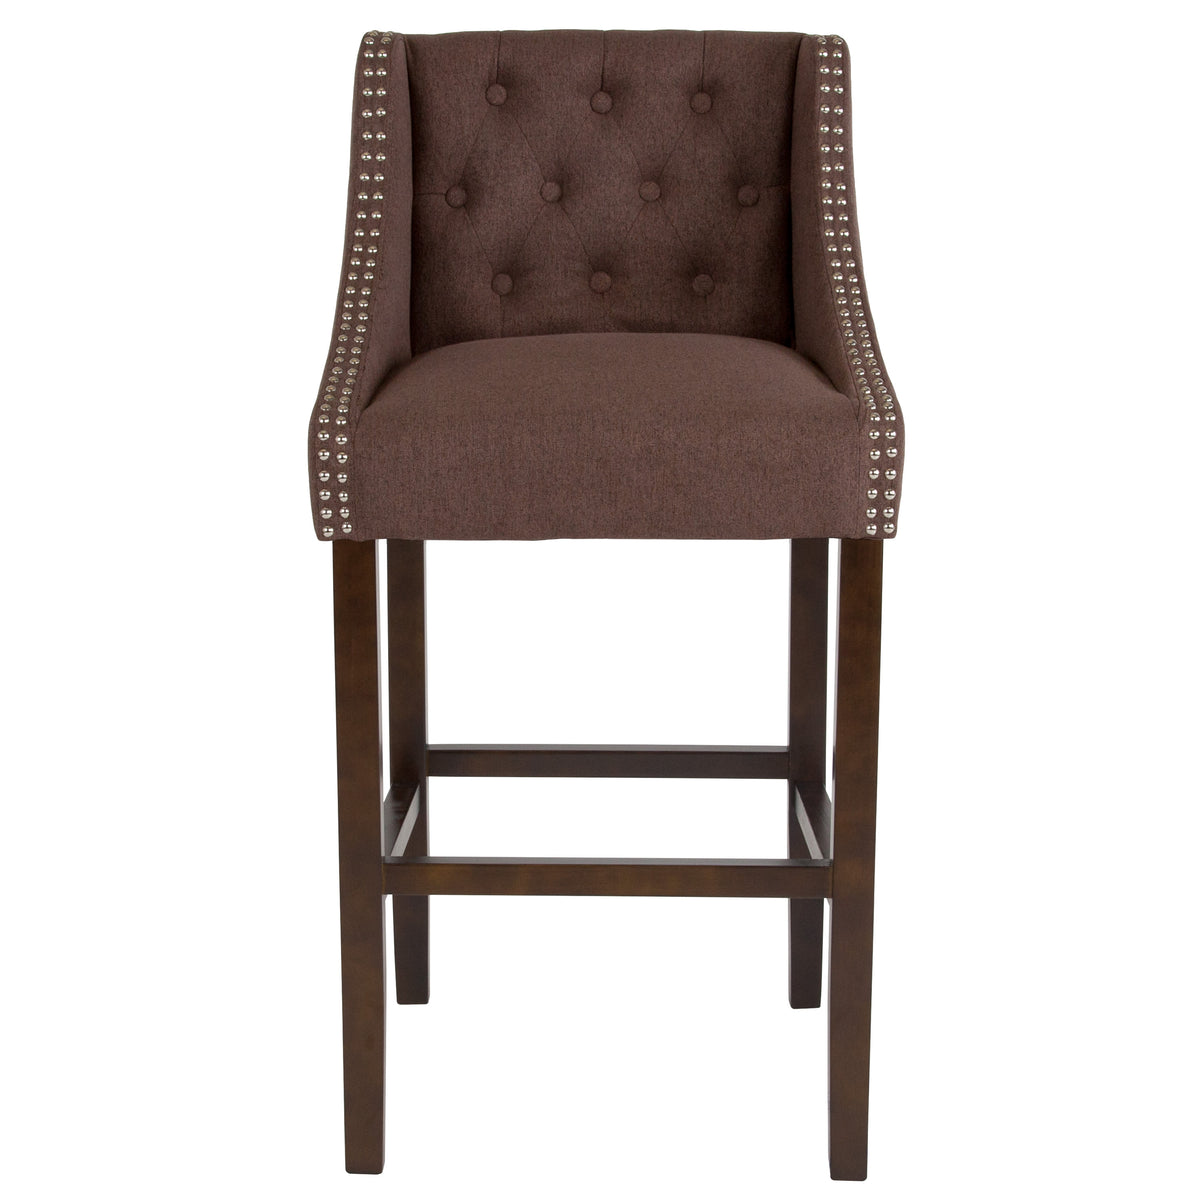 Brown Fabric |#| 30inch High Tufted Walnut Barstool with Accent Nail Trim in Brown Fabric